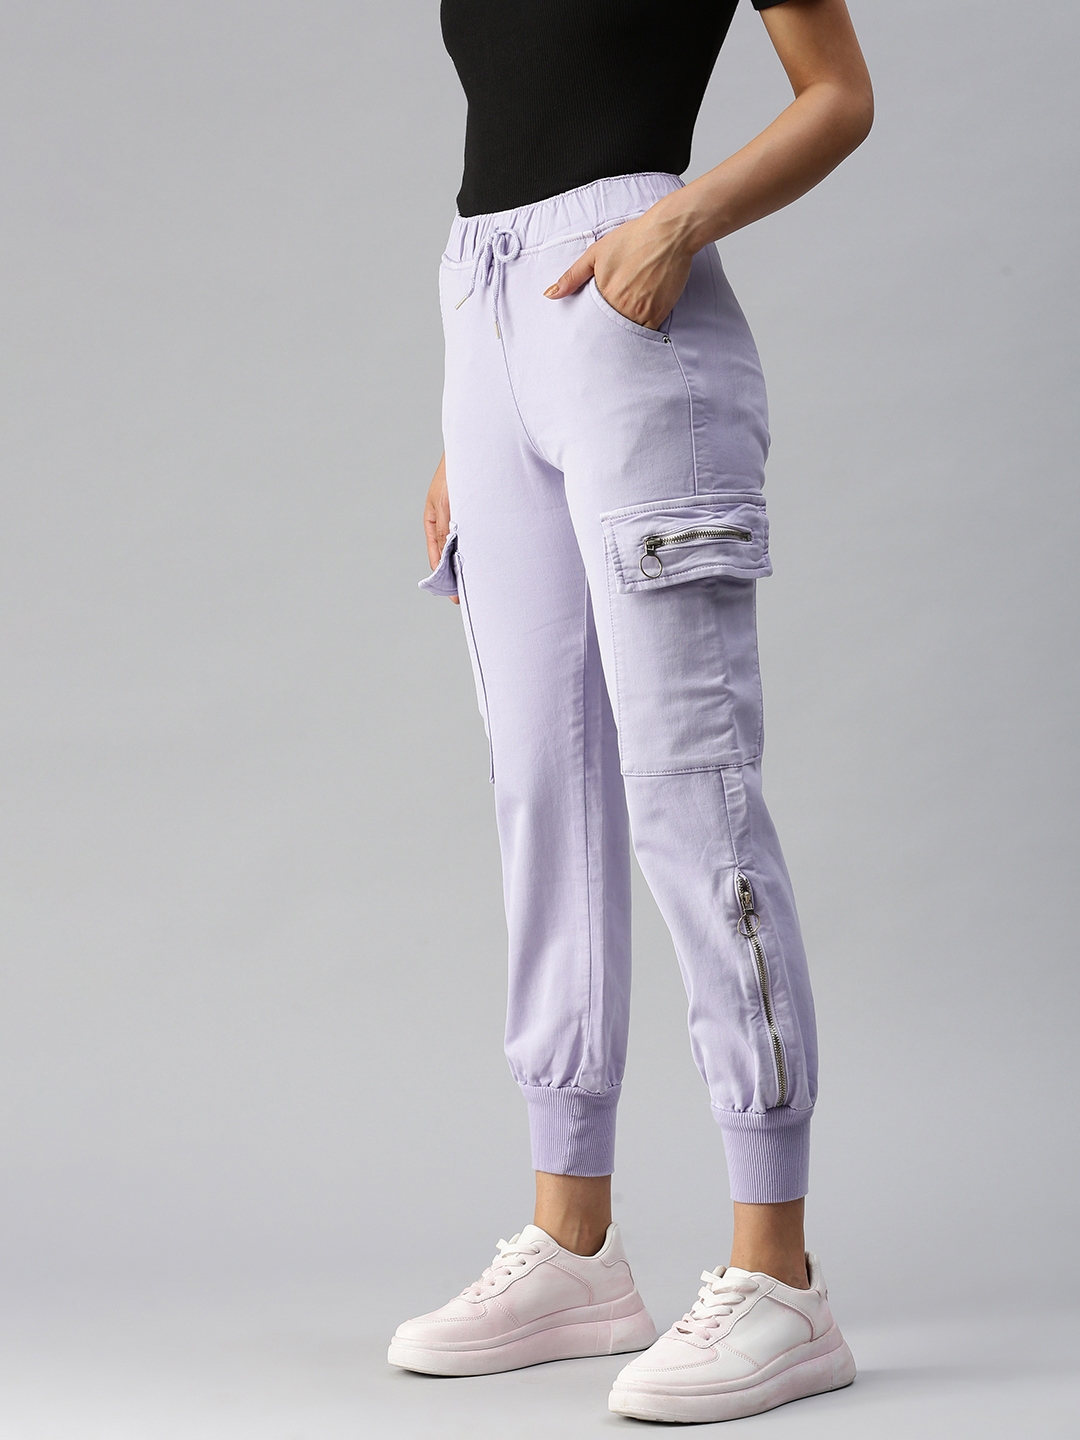 SHOWOFF Women's Clean Look High-Rise Lavender Jogger Fit Jeans